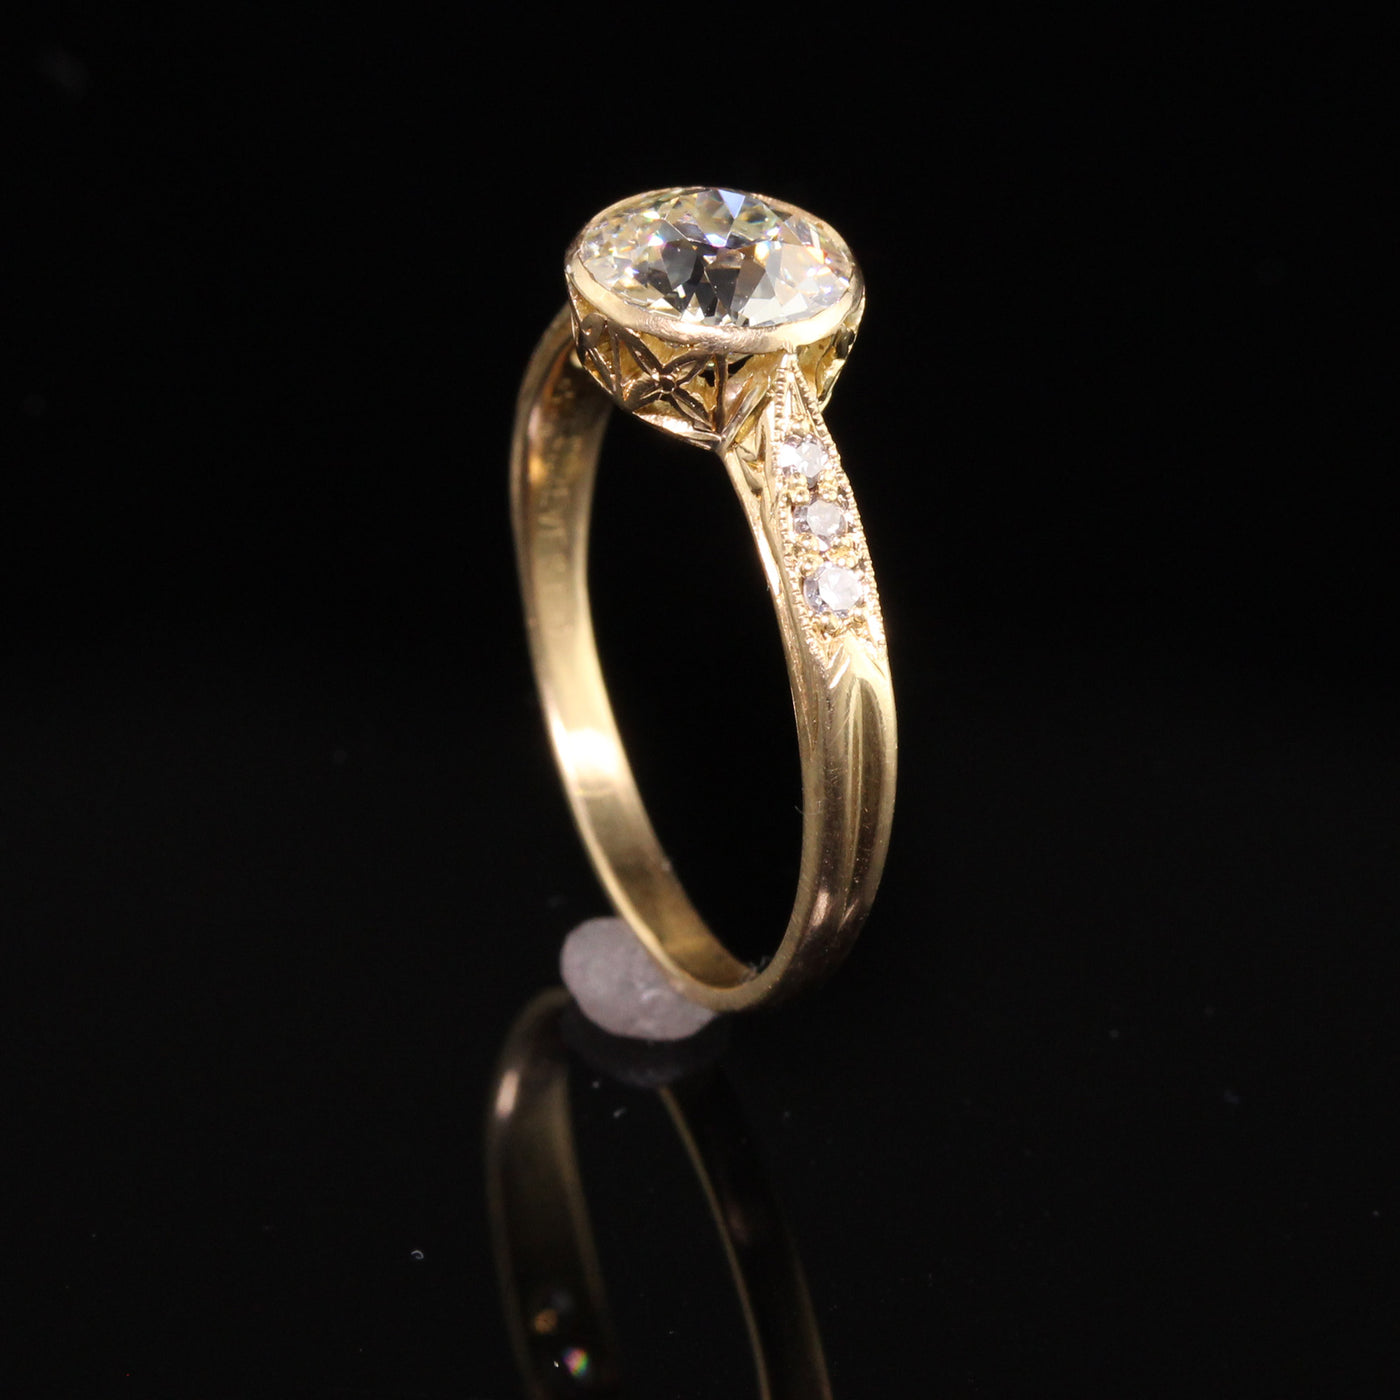 Antique Art Deco Shreve and Co 18K Yellow Gold Old Euro Diamond Engagement Ring